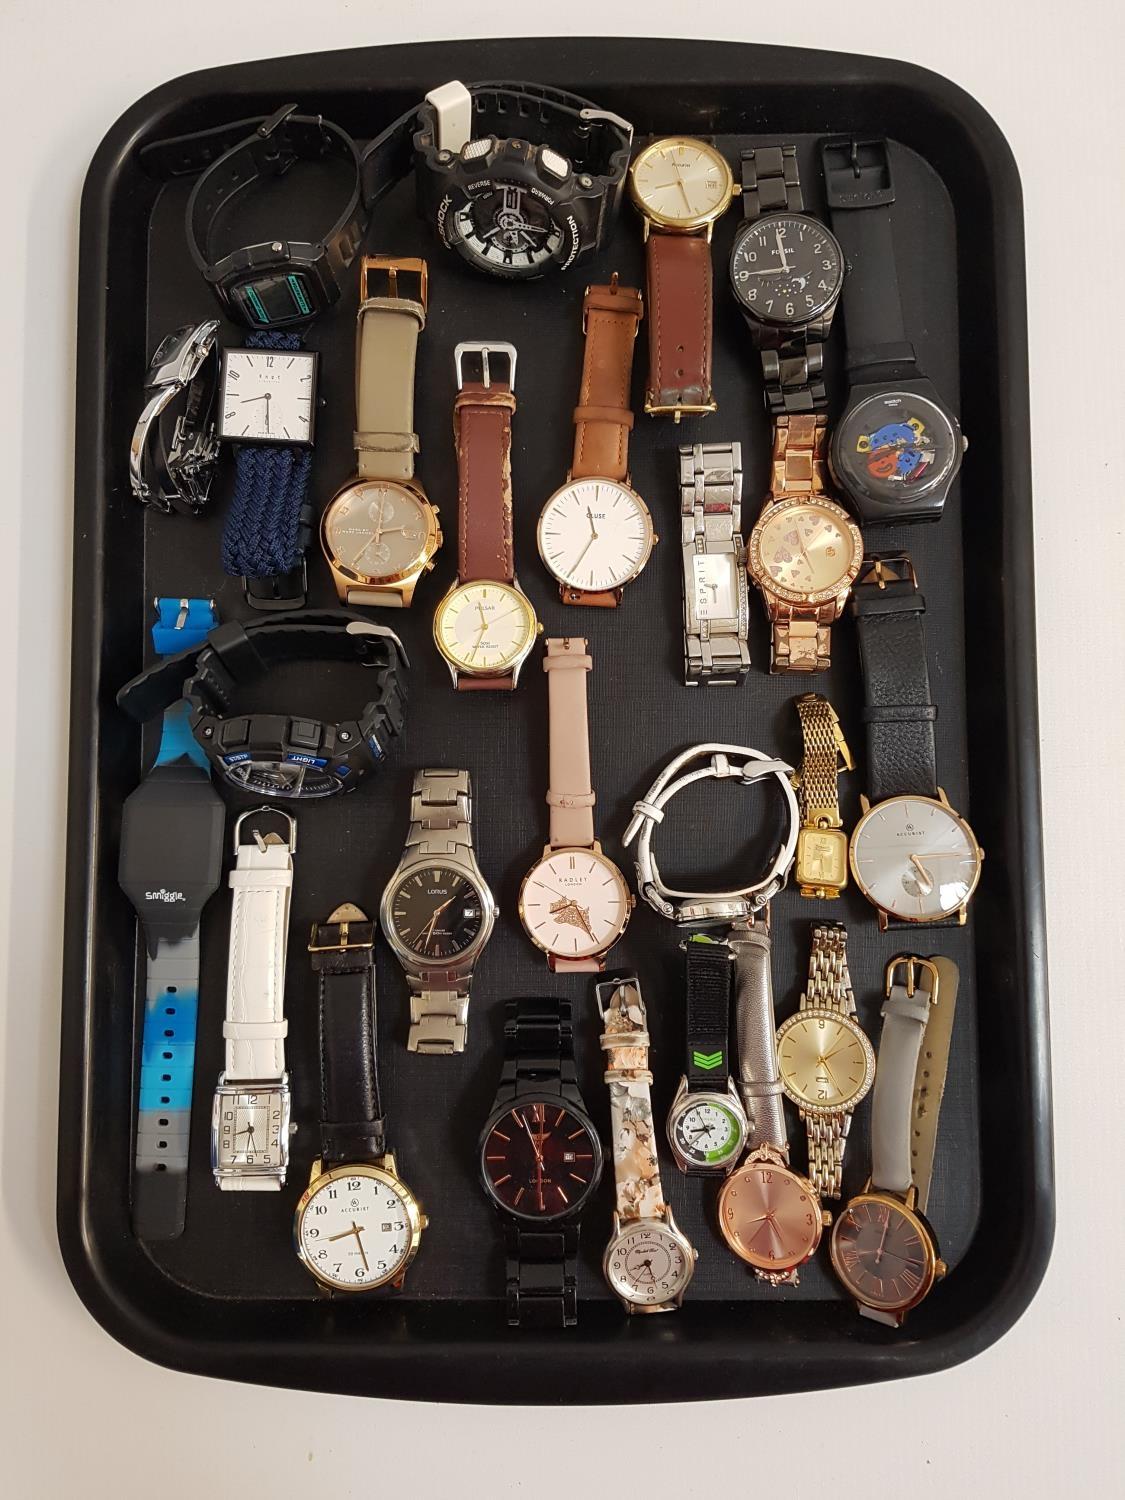 SELECTION OF LADIES AND GENTLEMEN'S WRISTWATCHES including Casio, G-Shock, Accurist, Fossil, Swatch,